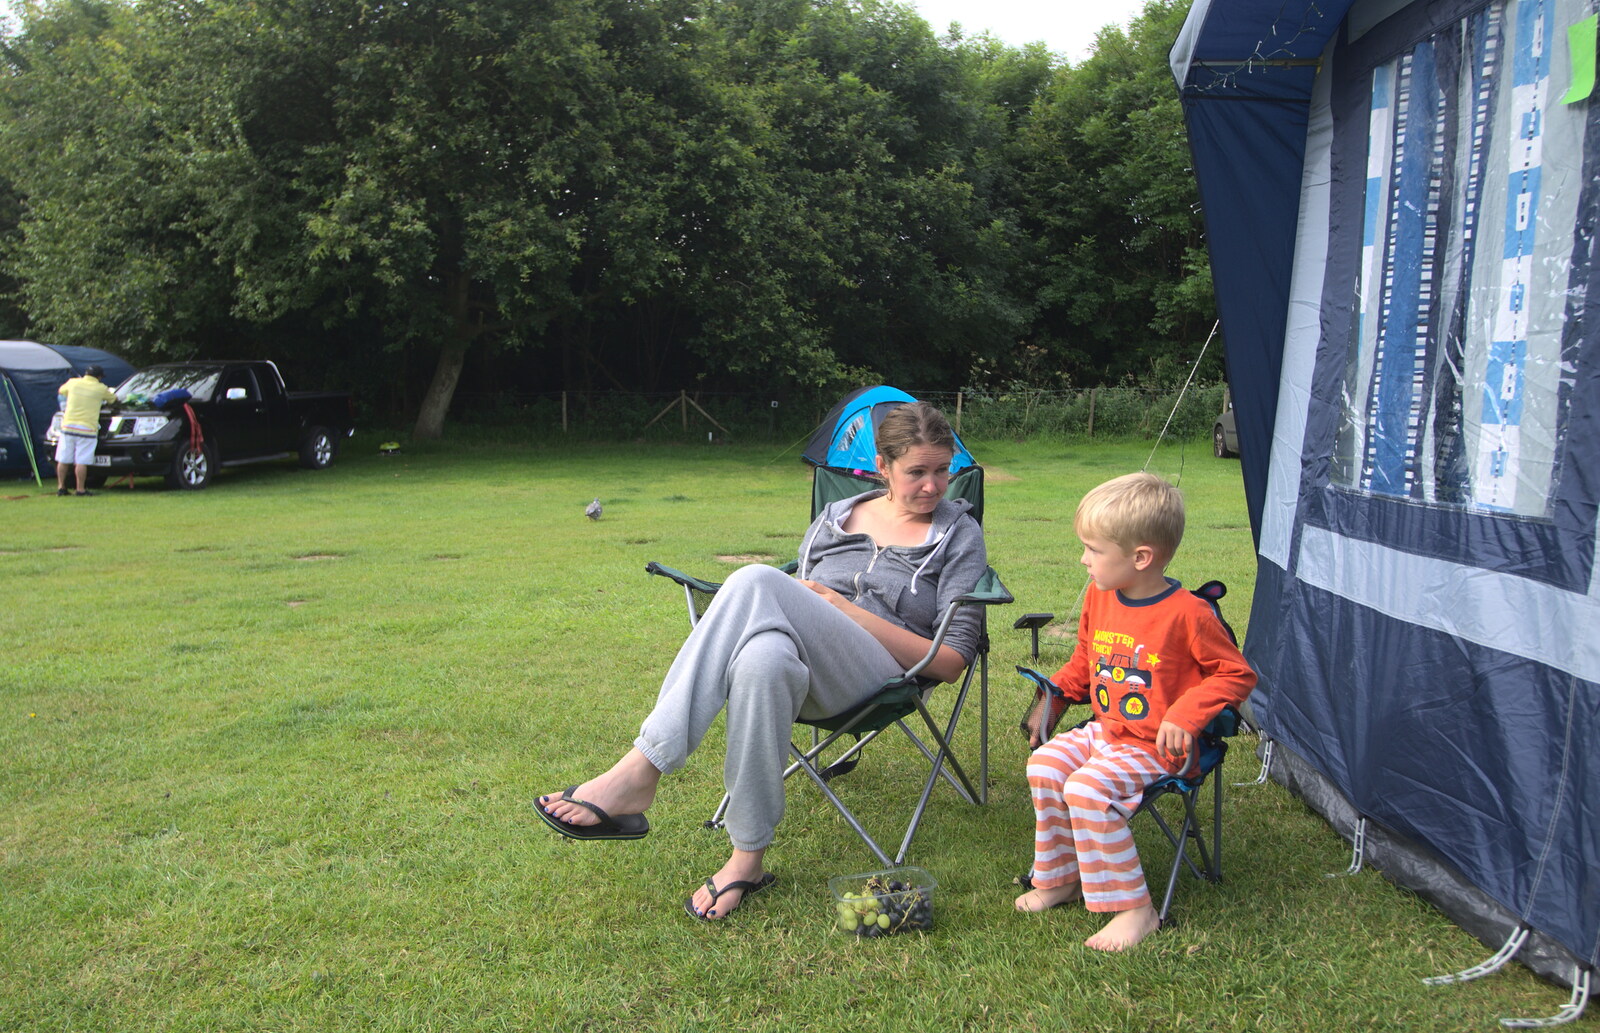 Isobel and Harry from Camping in West Runton, North Norfolk - 30th July 2016